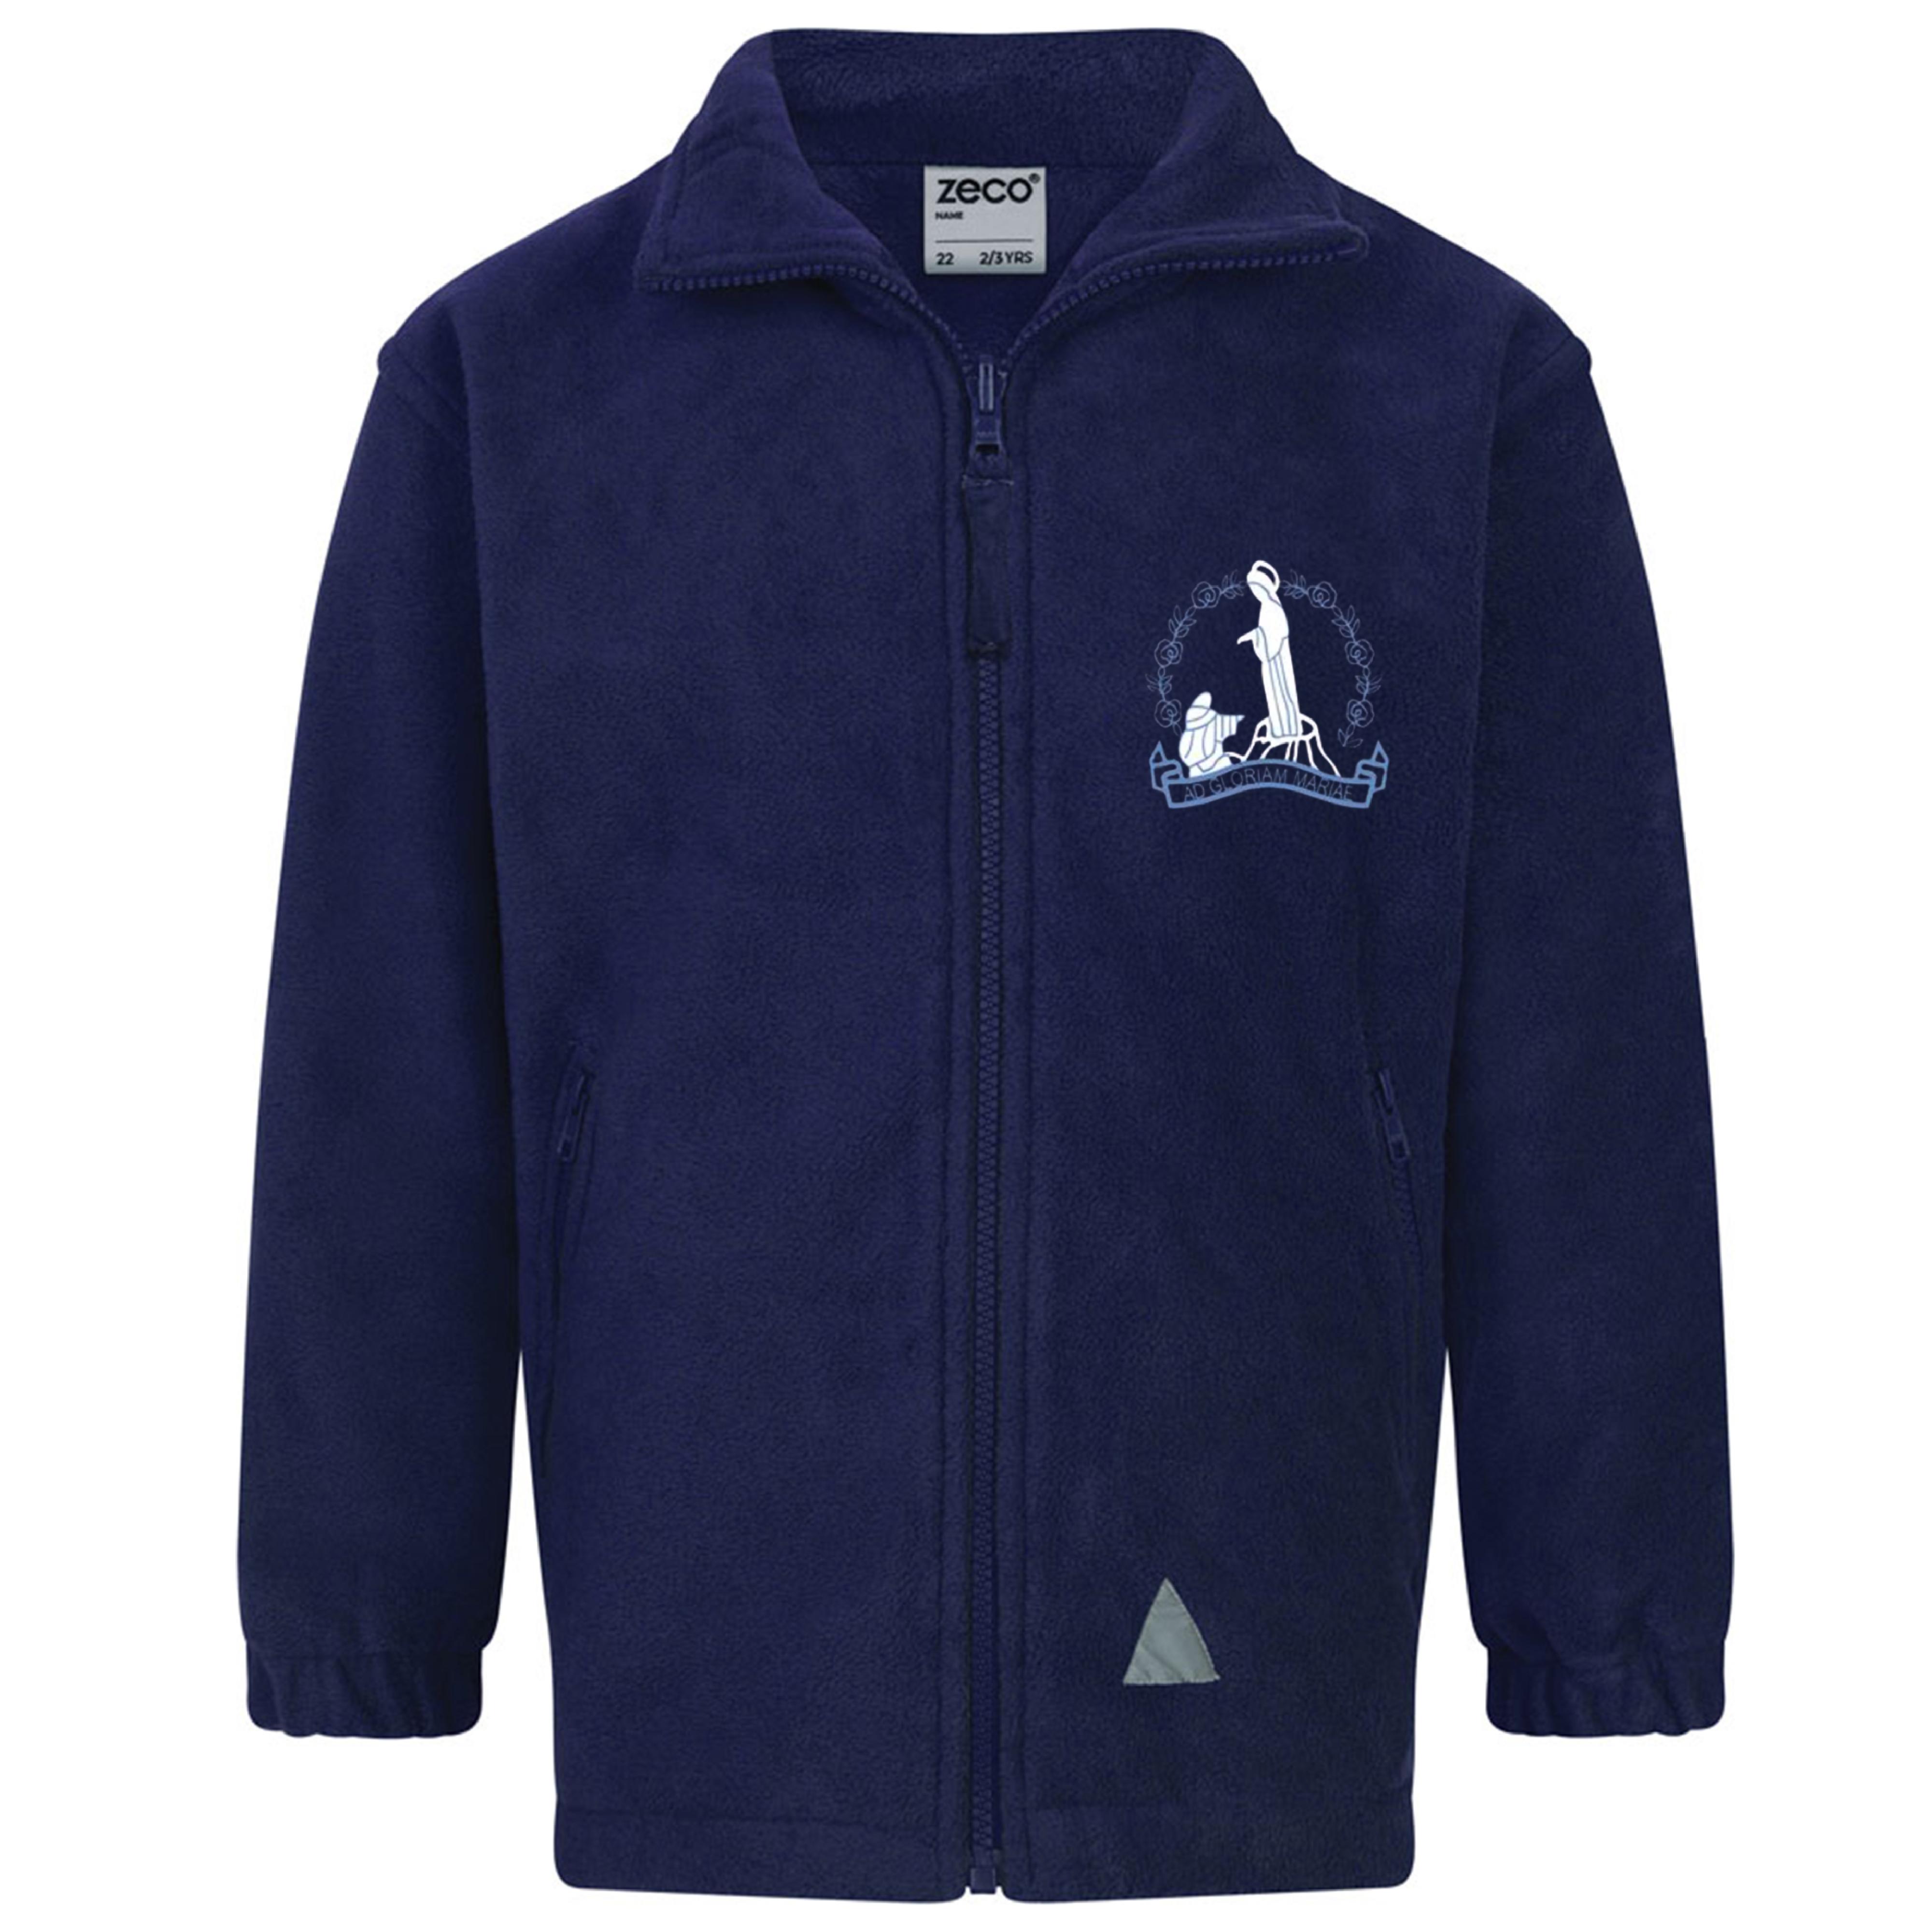 Our Lady of Lourdes Primary Fleece Jacket